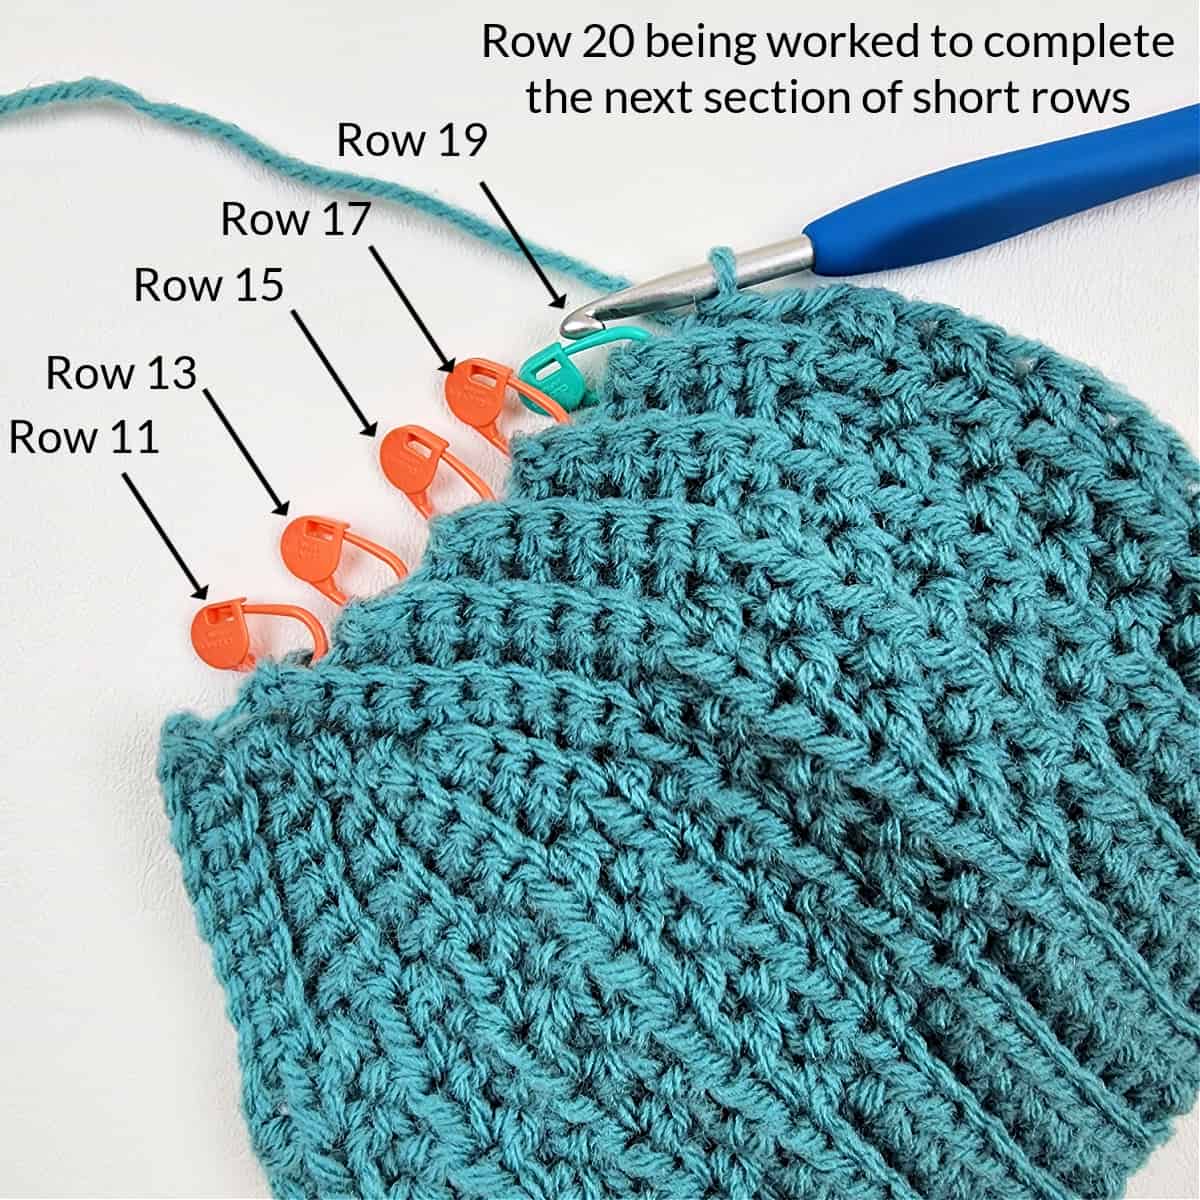 Locking stitch markers placed in all odd numbered rows of a section of crochet short rows.